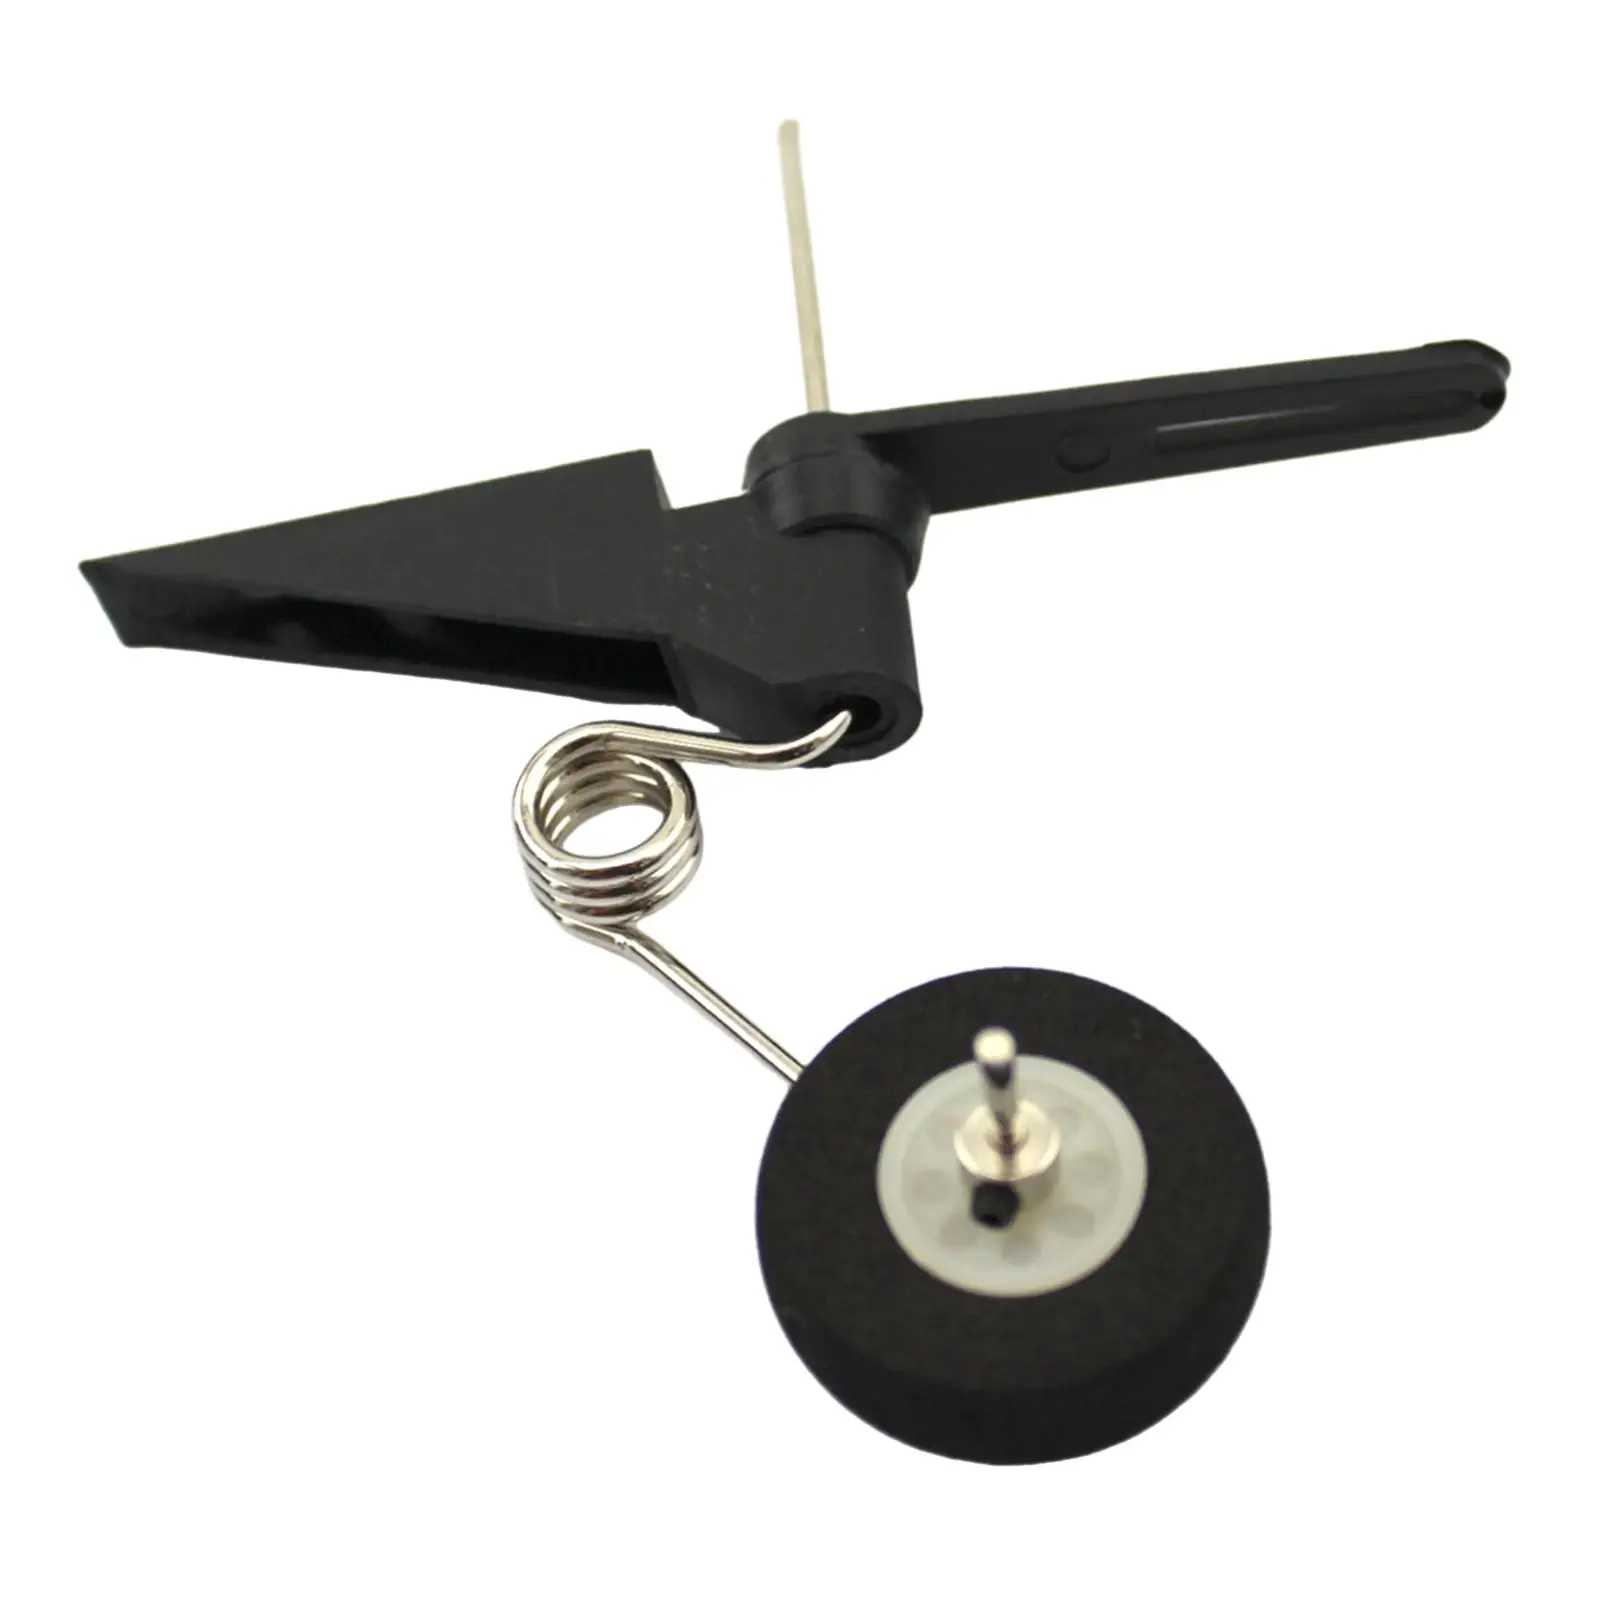 Tail Wheel Assembly for RC Airplane Attachment Rack Stable Replace Kits Parts Landing Gear DIY